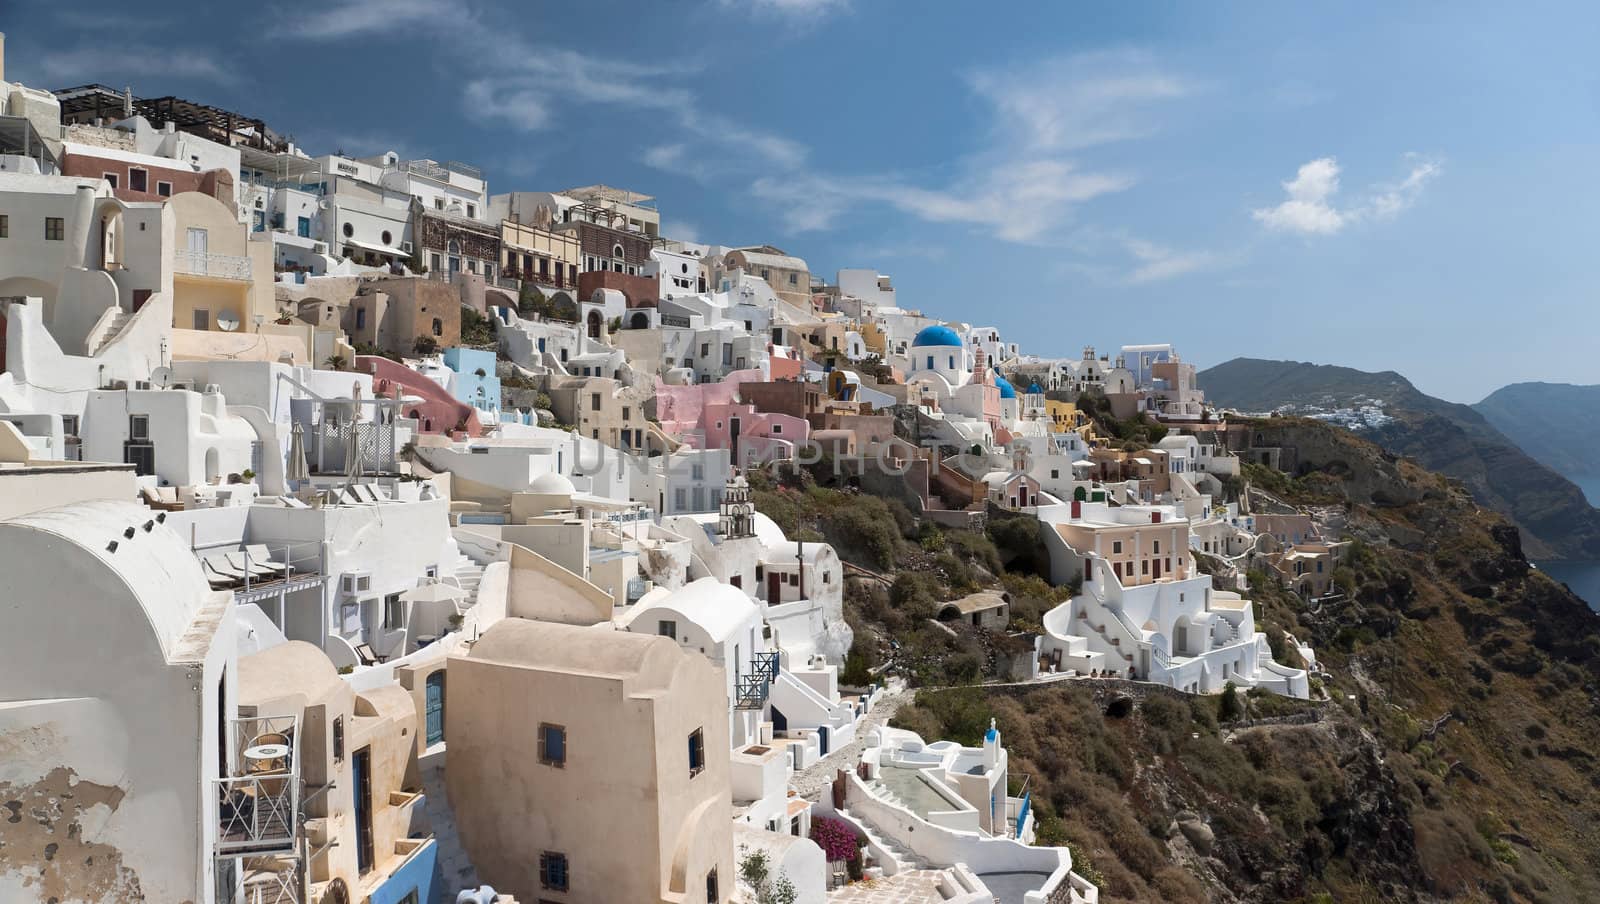 Ia fragment in Santorini - panorama by mulden